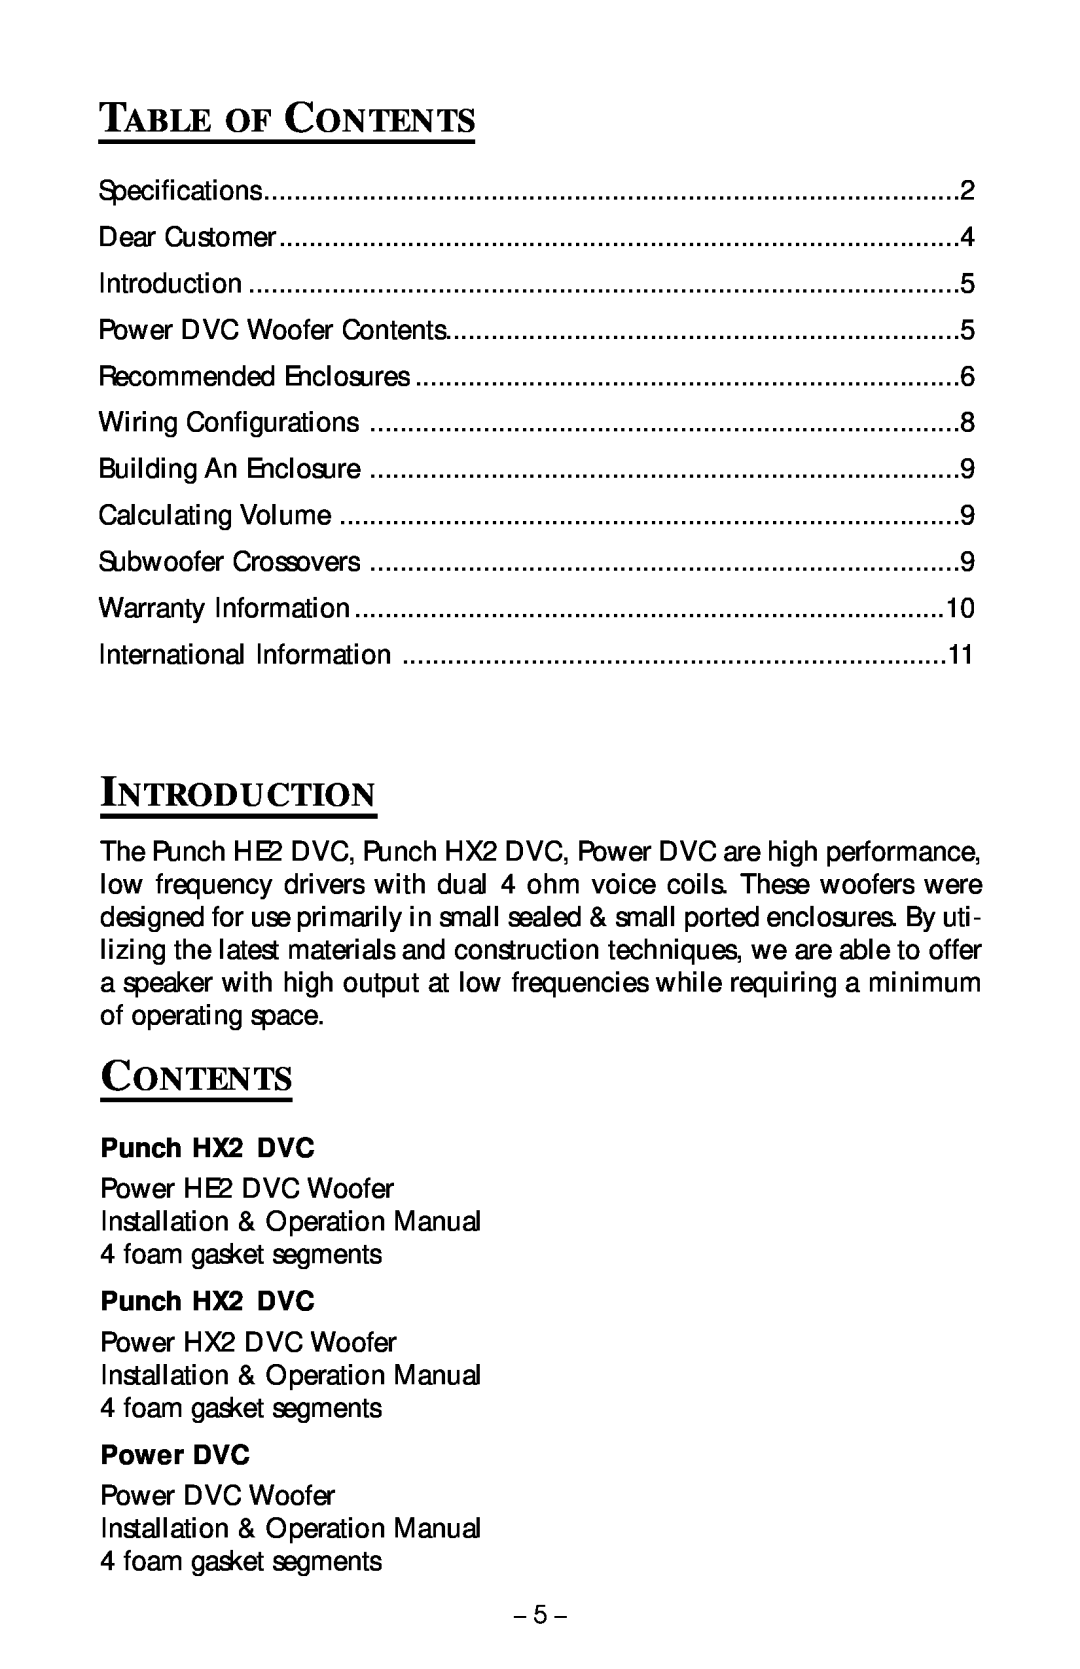 Rockford Fosgate RFD1218, RFR2215, RFP2208, RFP2210, RFD1210 manual Table Of Contents, Introduction, Punch HX2 DVC, Power DVC 